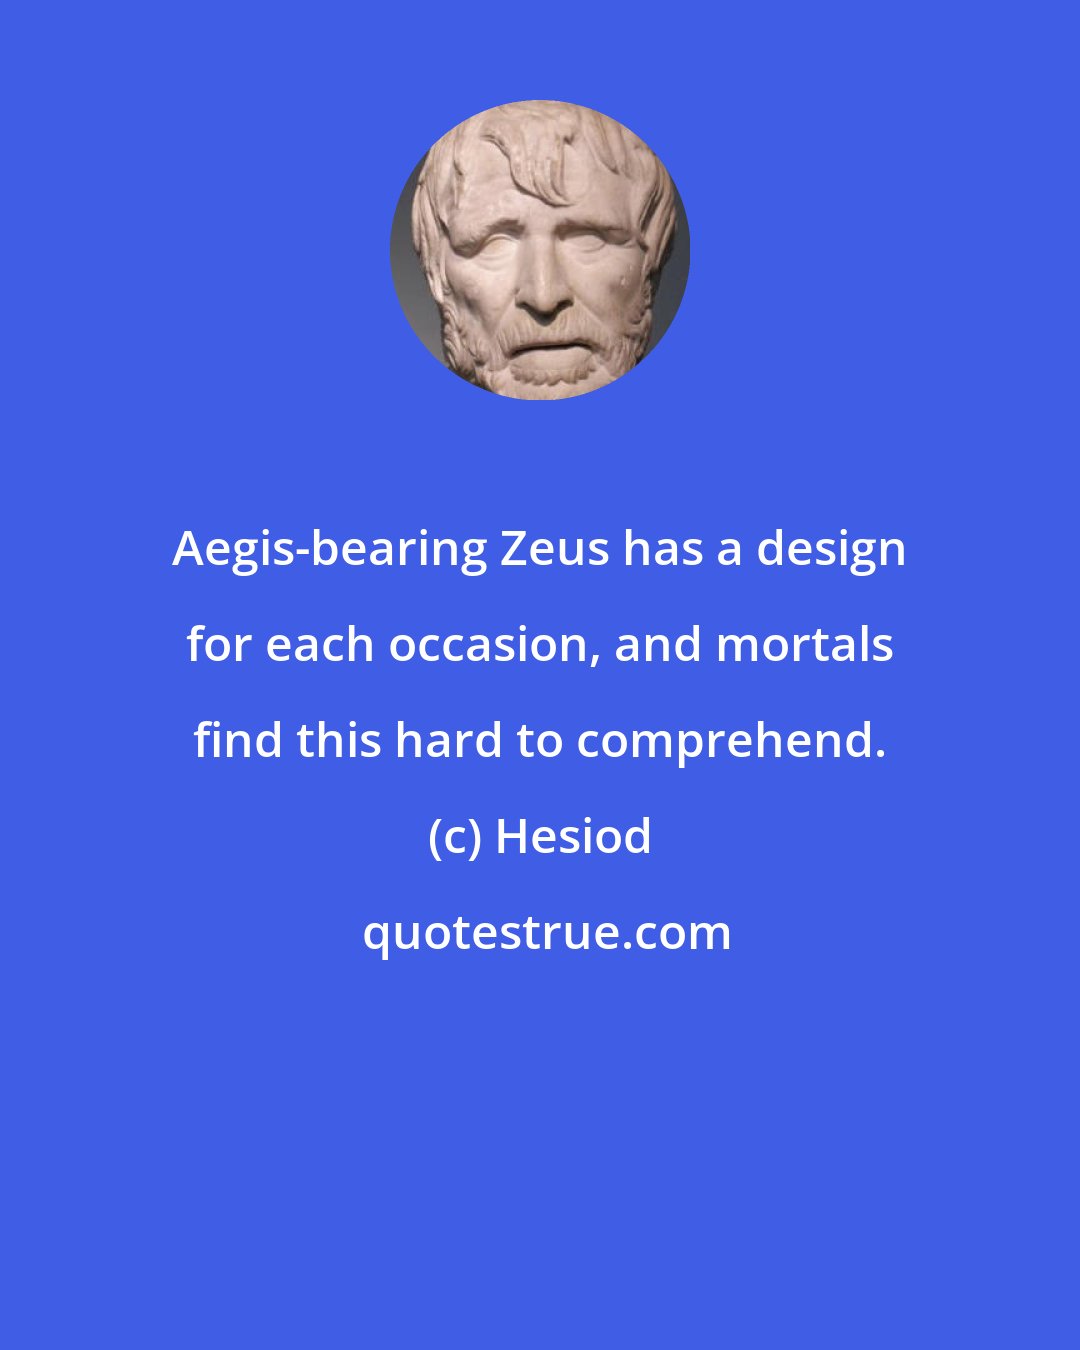 Hesiod: Aegis-bearing Zeus has a design for each occasion, and mortals find this hard to comprehend.